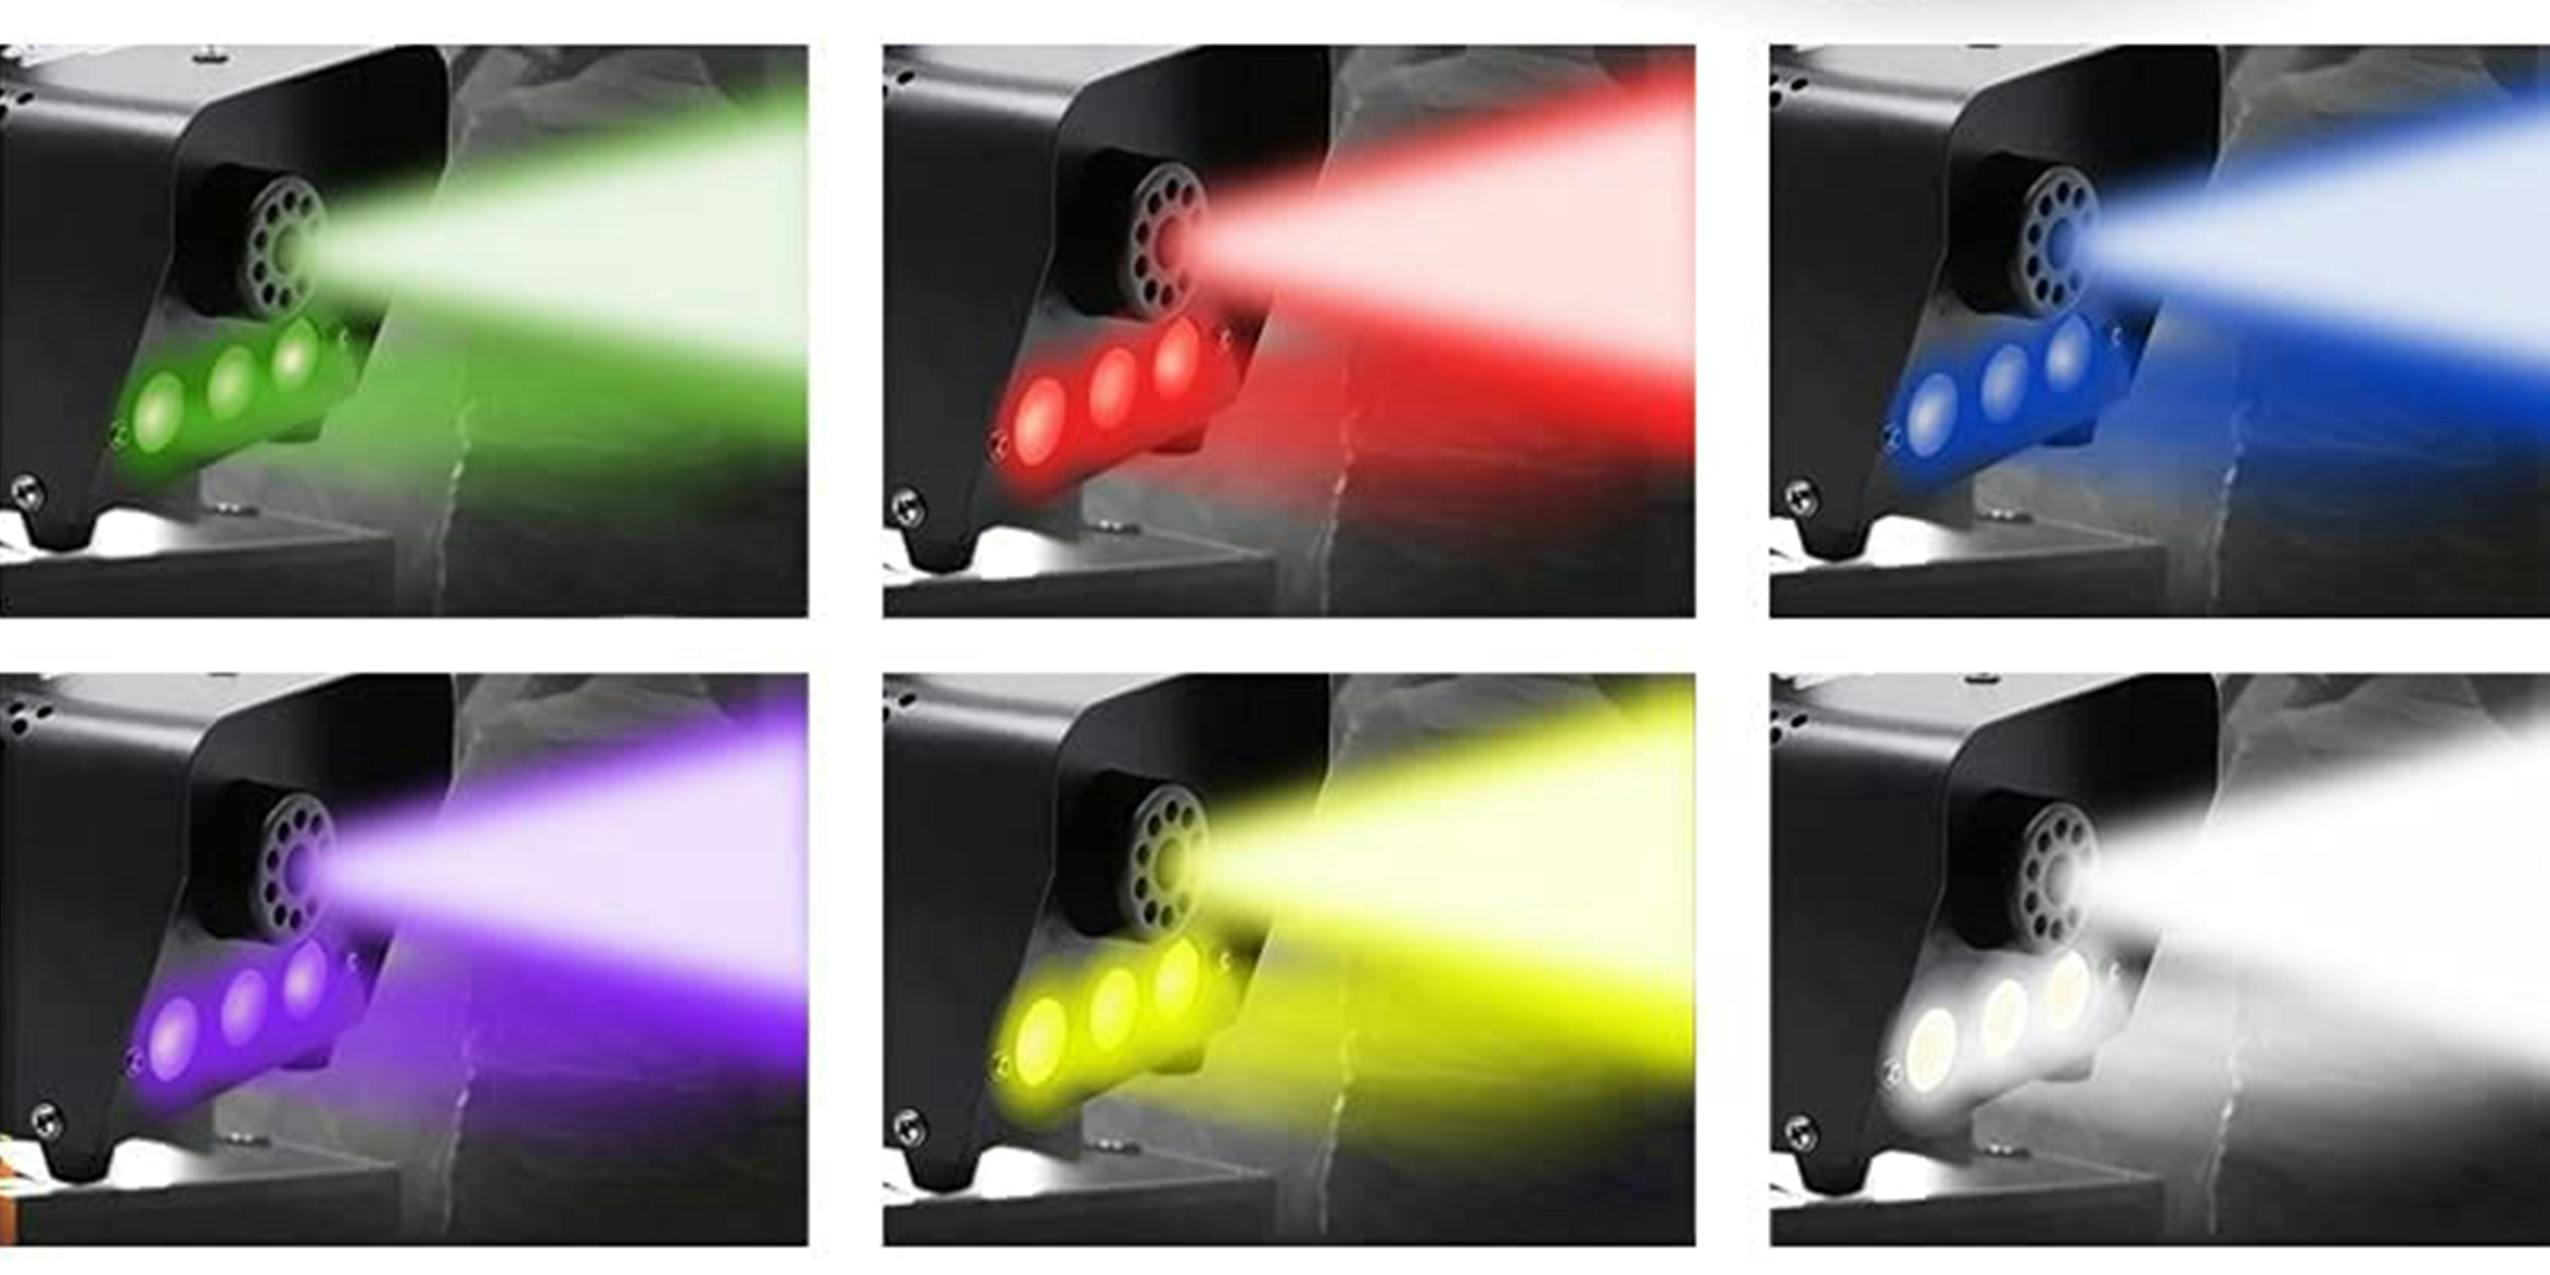 Fog machine displaying different color lights.